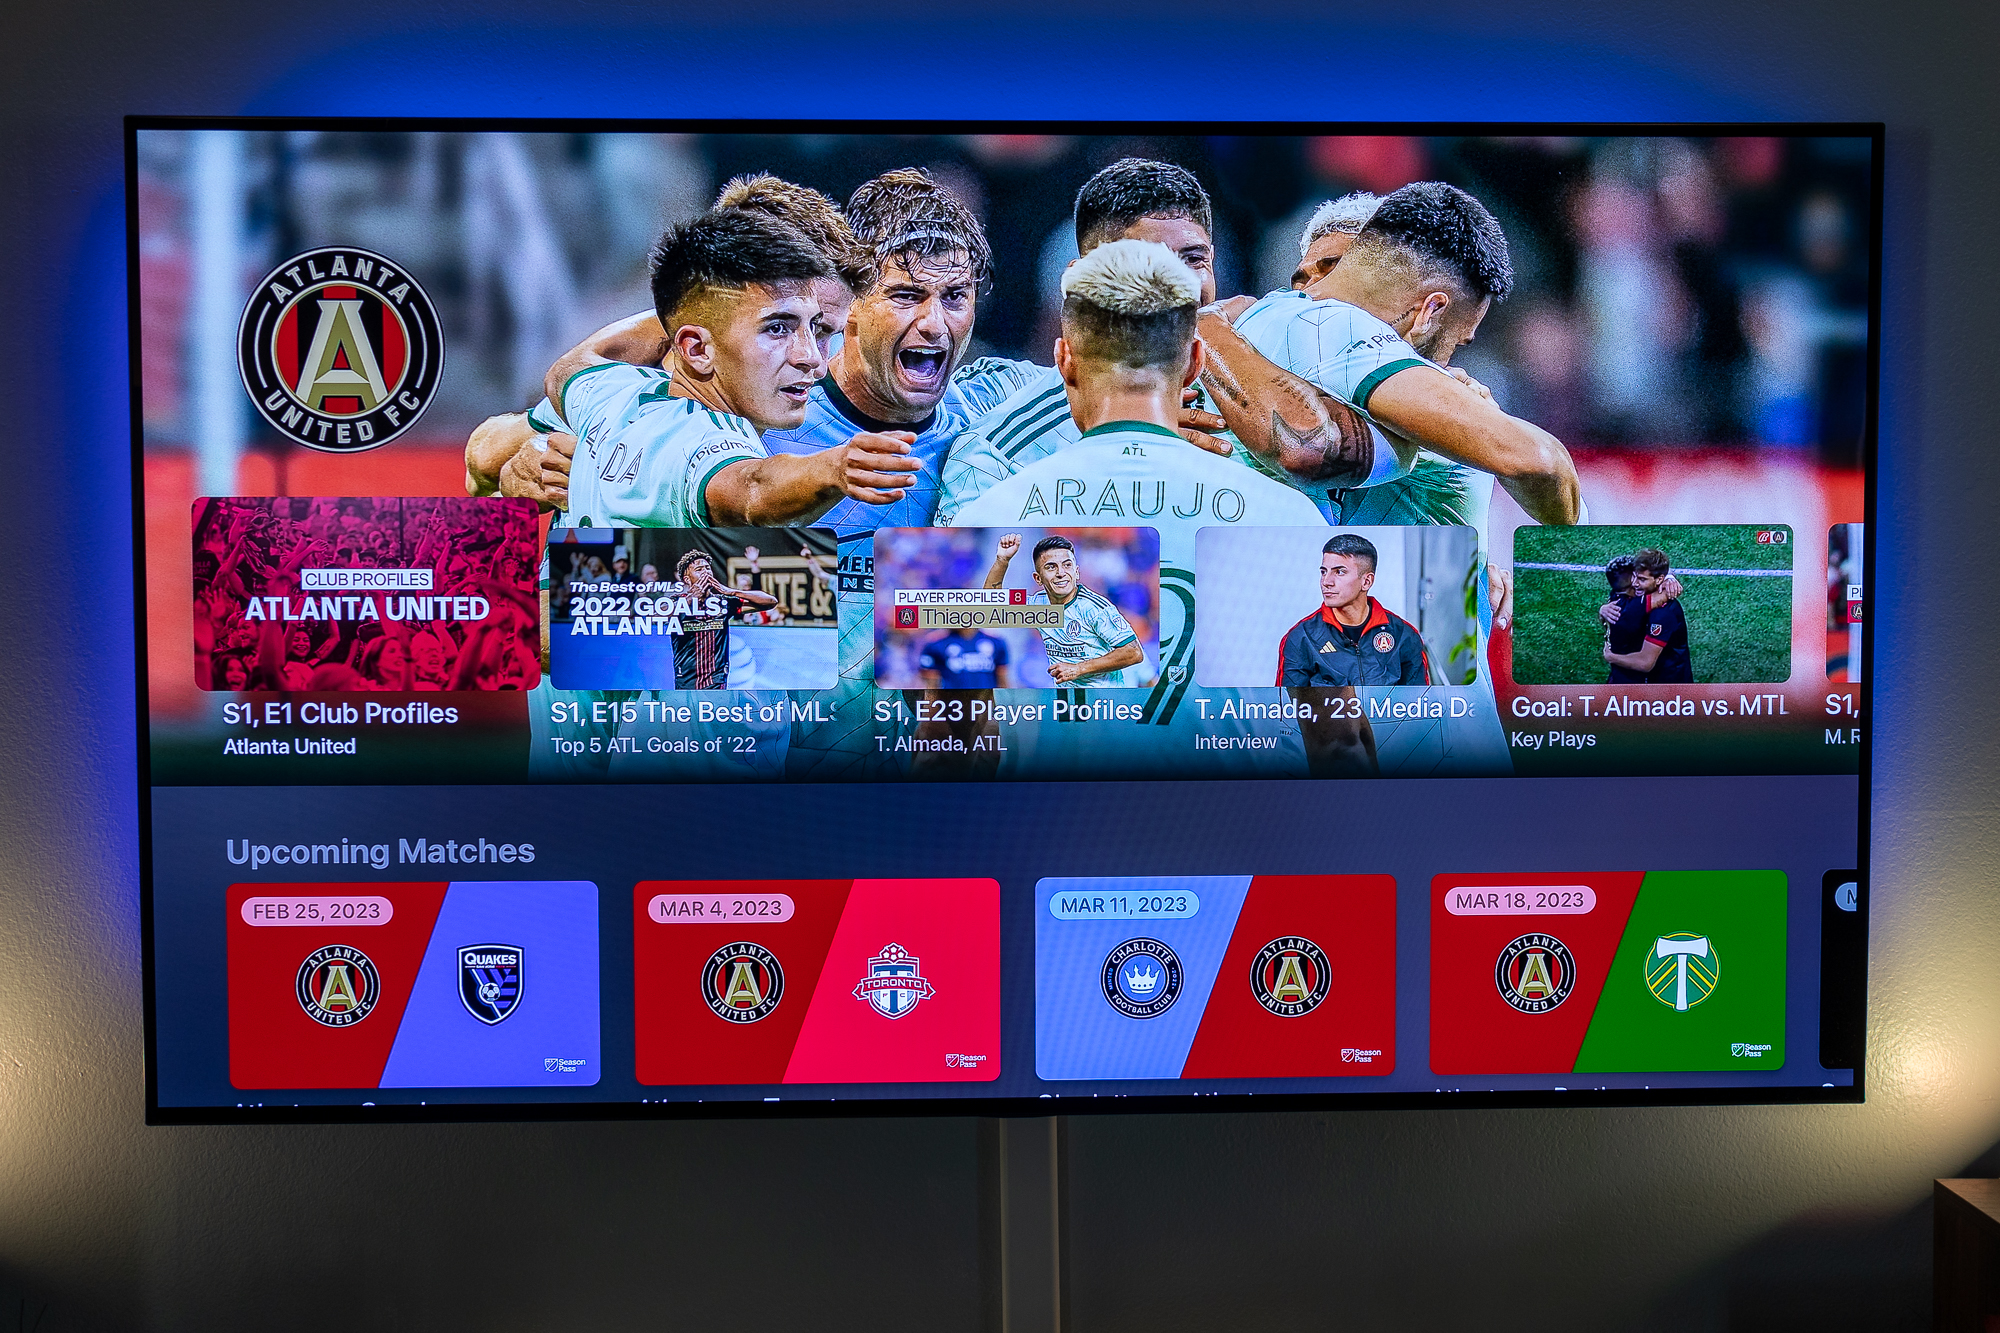 LG TV Adds FIFA+ to Its FAST LineUp - Targets Sports Streaming